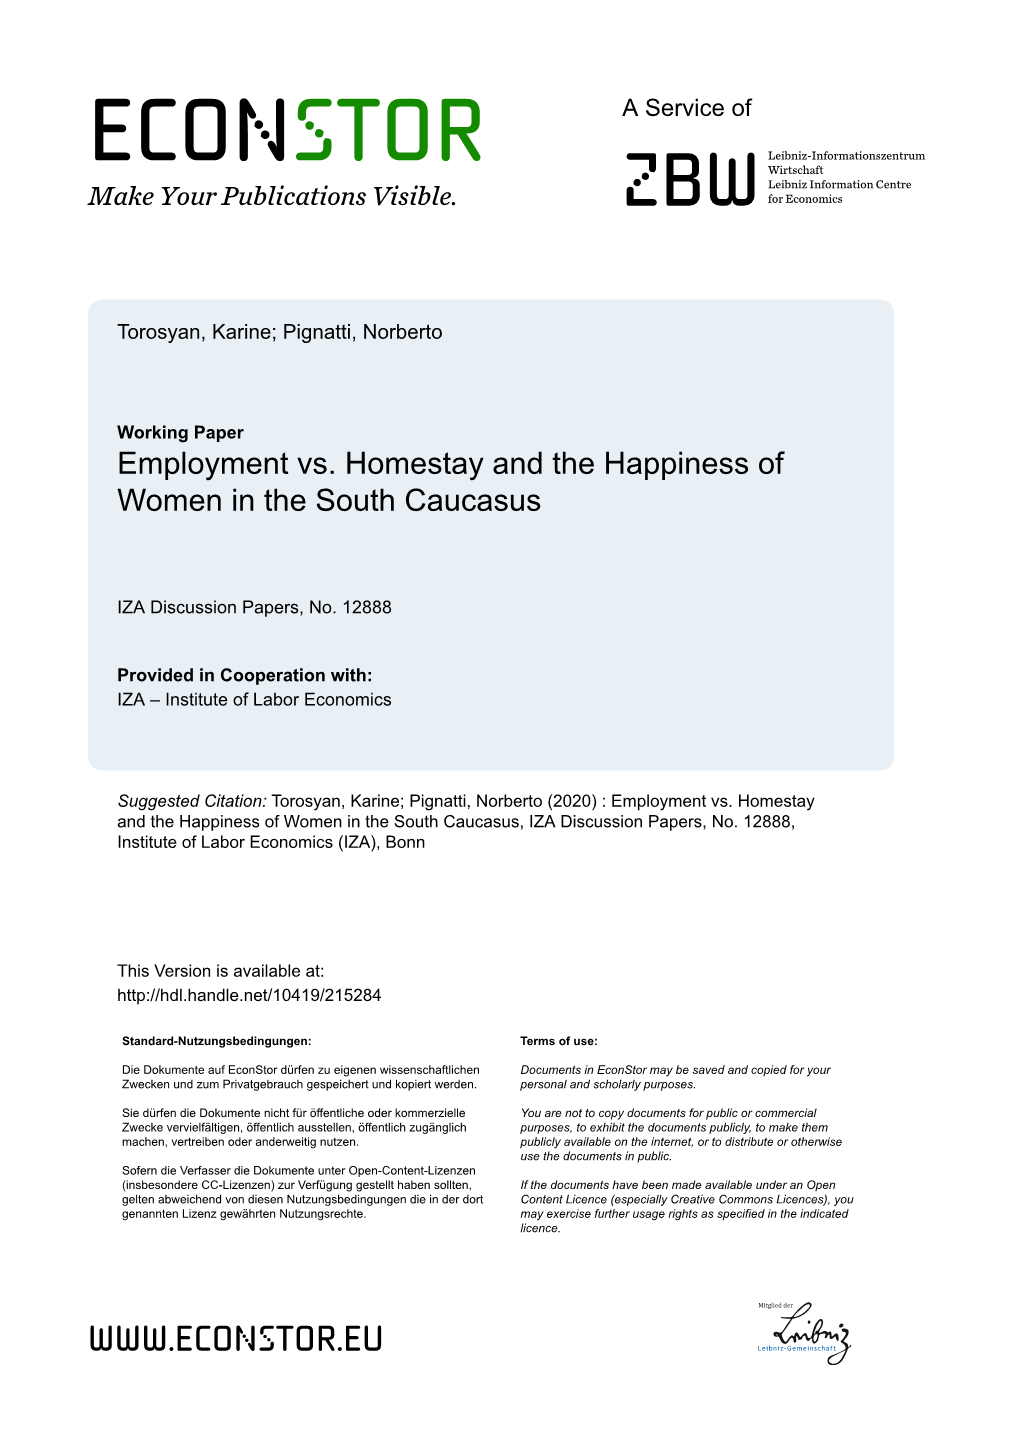 Employment Vs. Homestay and the Happiness of Women in the South Caucasus